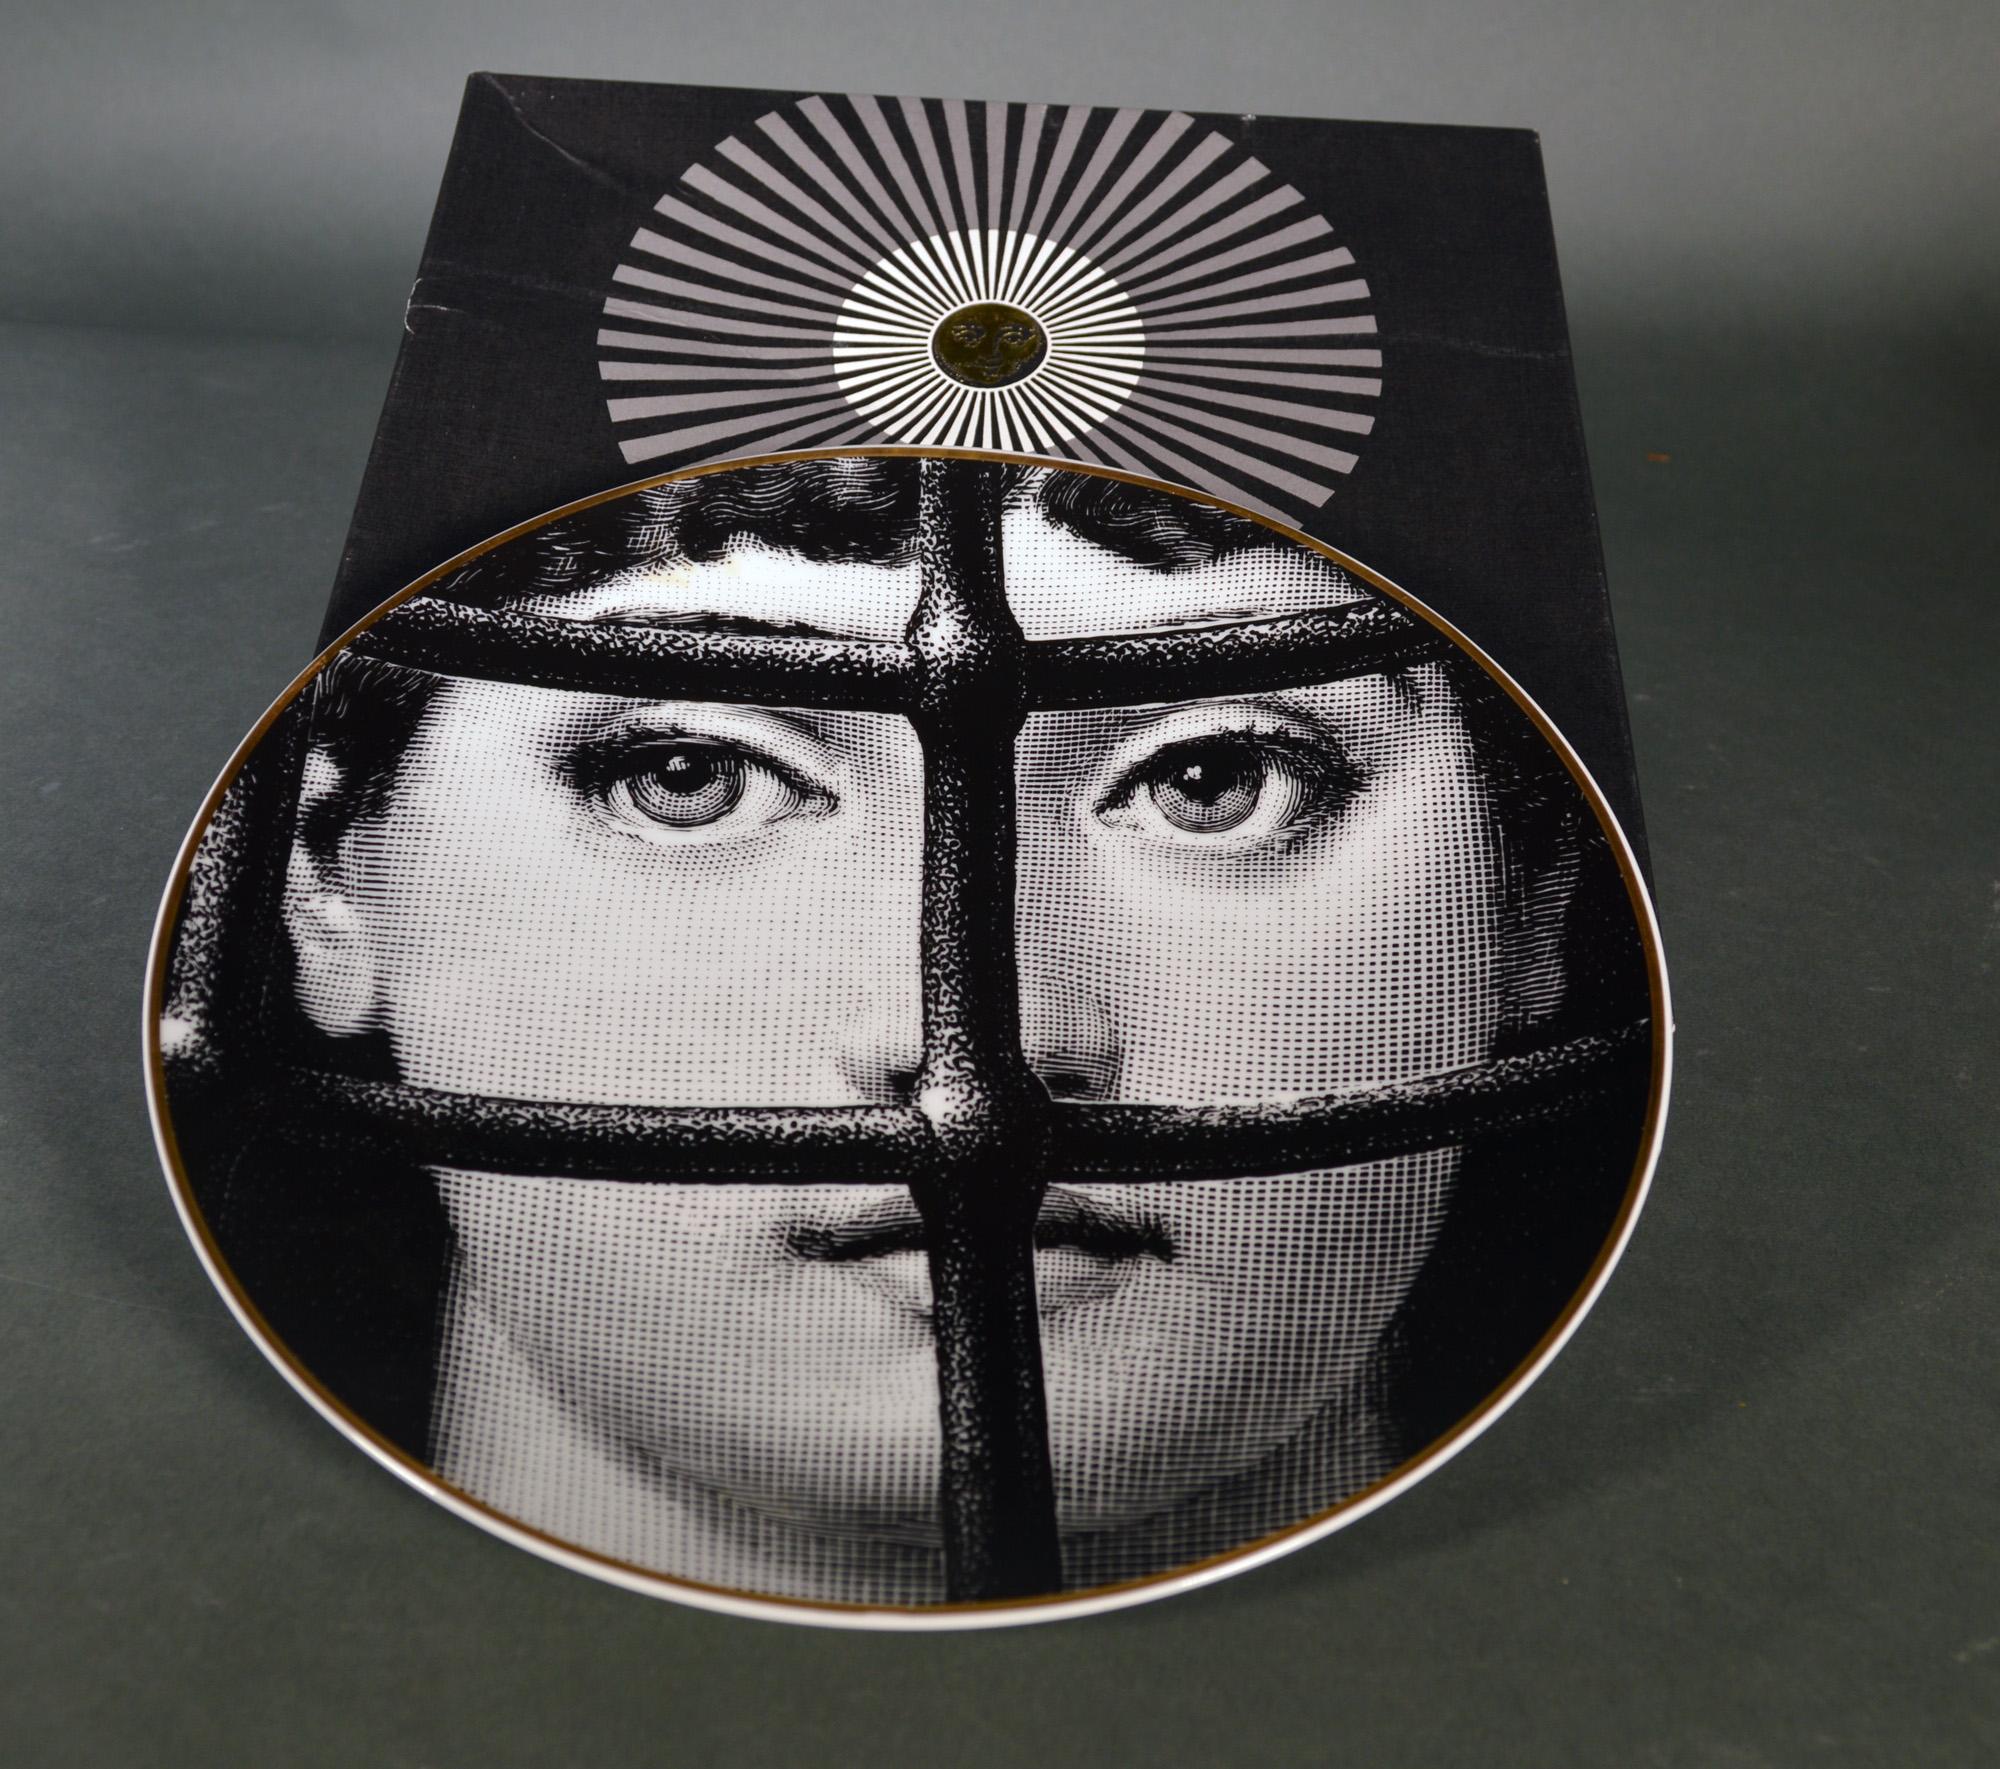 Mid-Century Modern Piero Fornasetti Rosenthal Themes & Variations Plate, 
Motiv 22,
With original box,
The 1980s

From a select group of porcelain plates made by Rosenthal from Piero Fornasetti's catalog of designs of the Themes & Variations